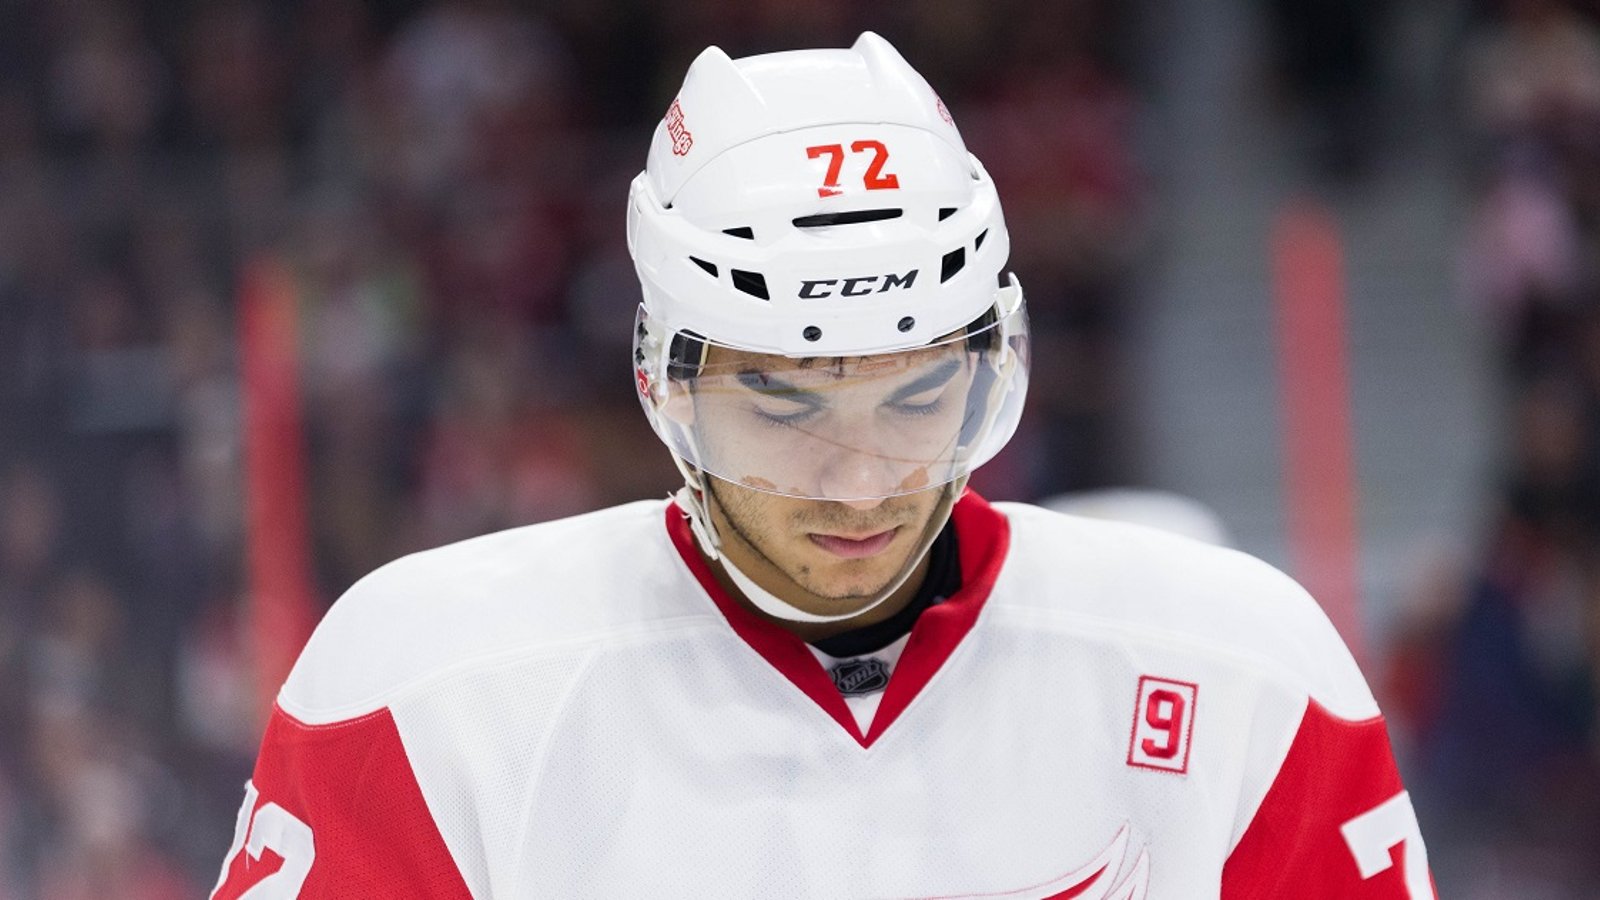 Latest update on Athanasiou is more bad news for the Red Wings.